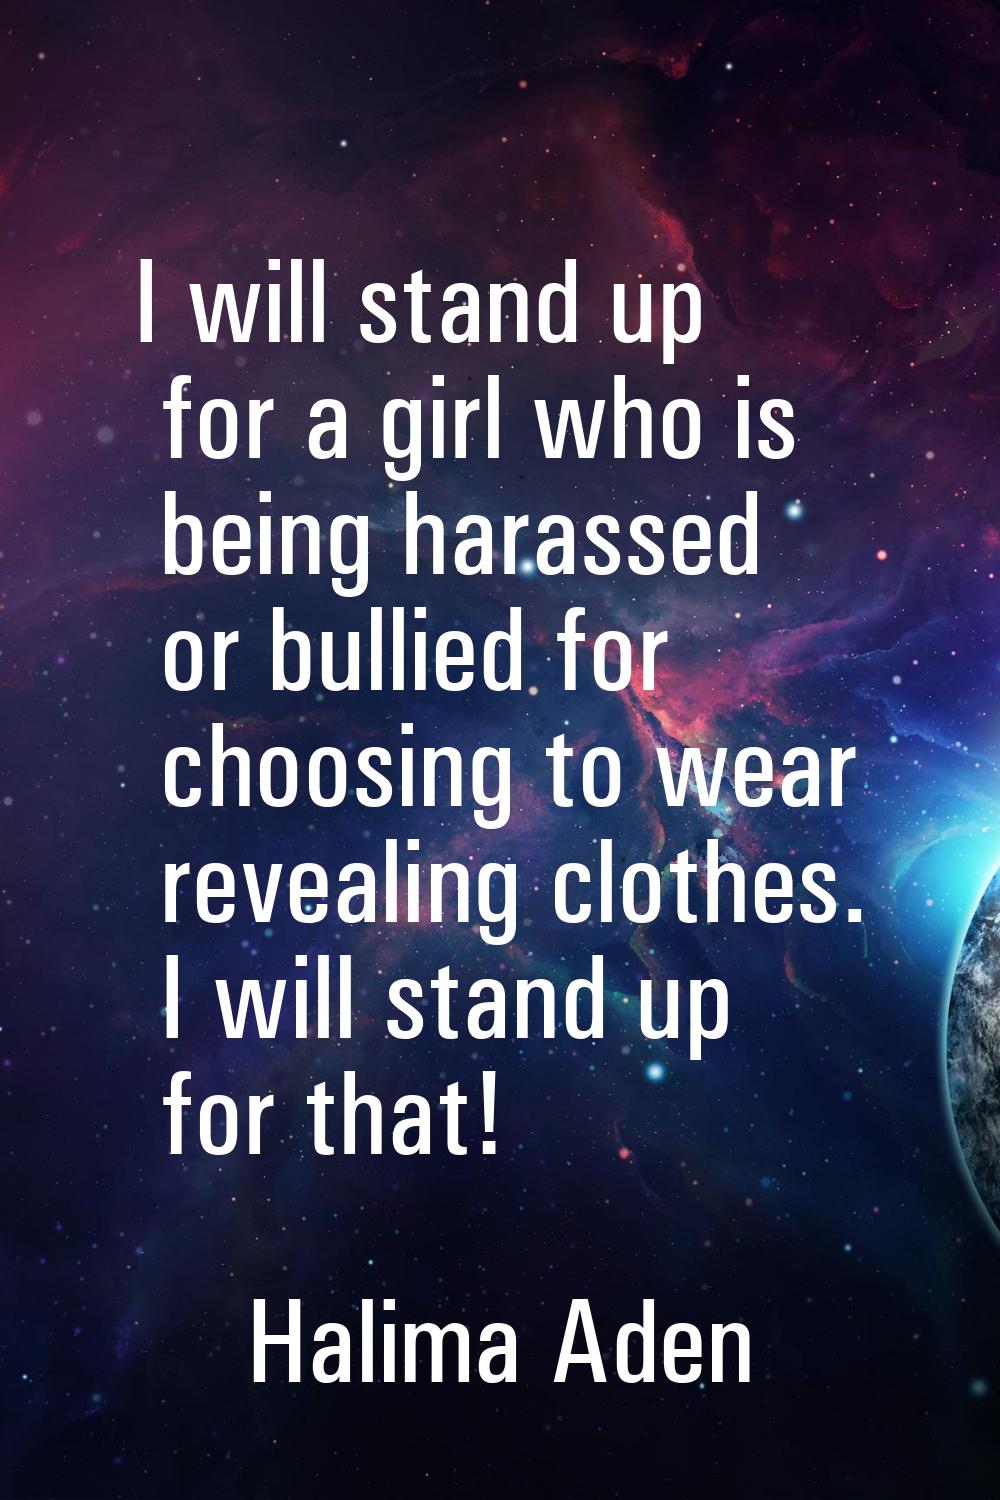 I will stand up for a girl who is being harassed or bullied for choosing to wear revealing clothes.